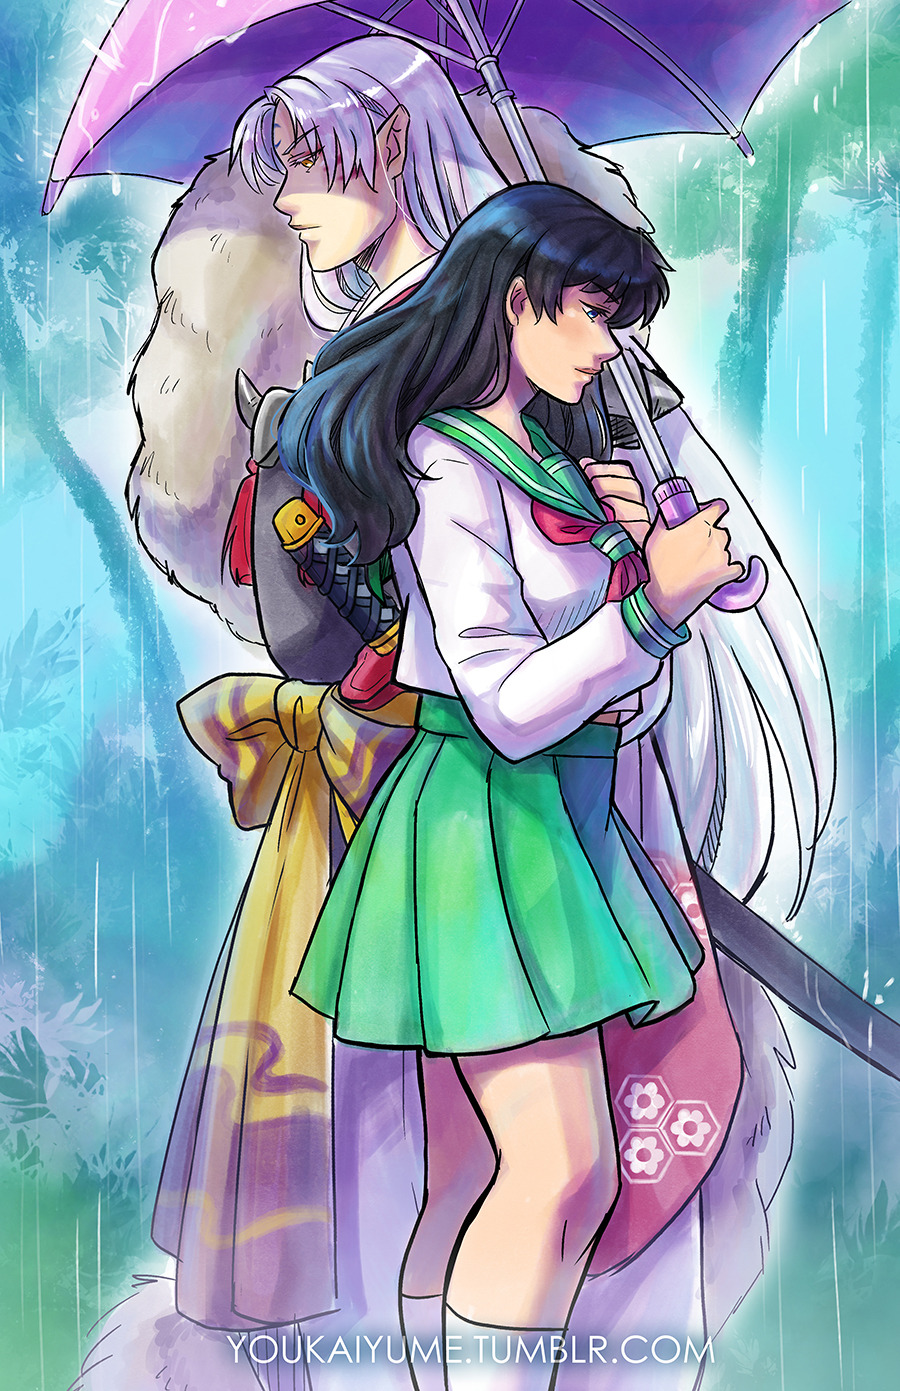 Dtninja831 - Adult Kagome and Rin on the latest cover of